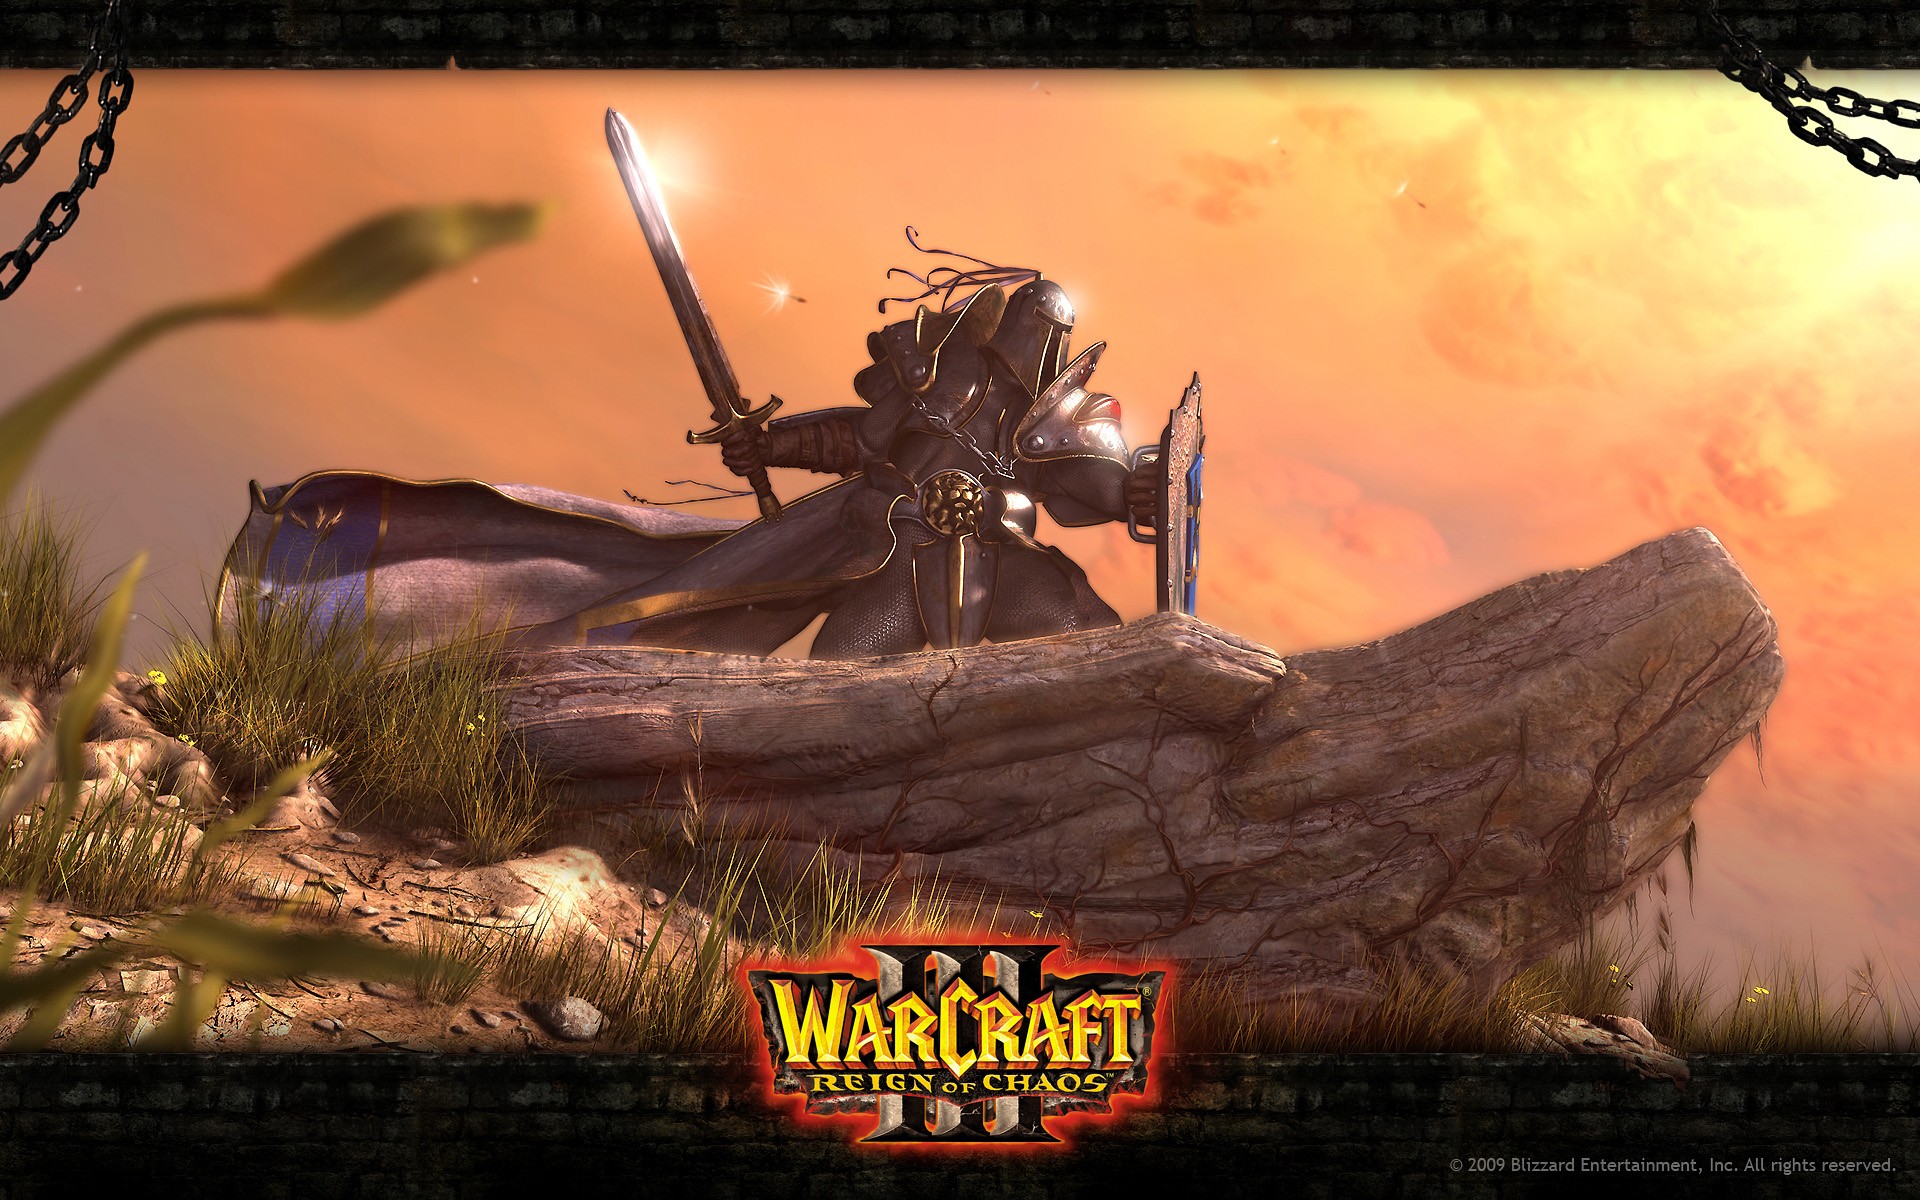 Warcraft Warcraft Iii Reign Of Chaos Warcraft Iii PC Gaming 2009 Year Fantasy Art Armored Blizzard E 1920x1200